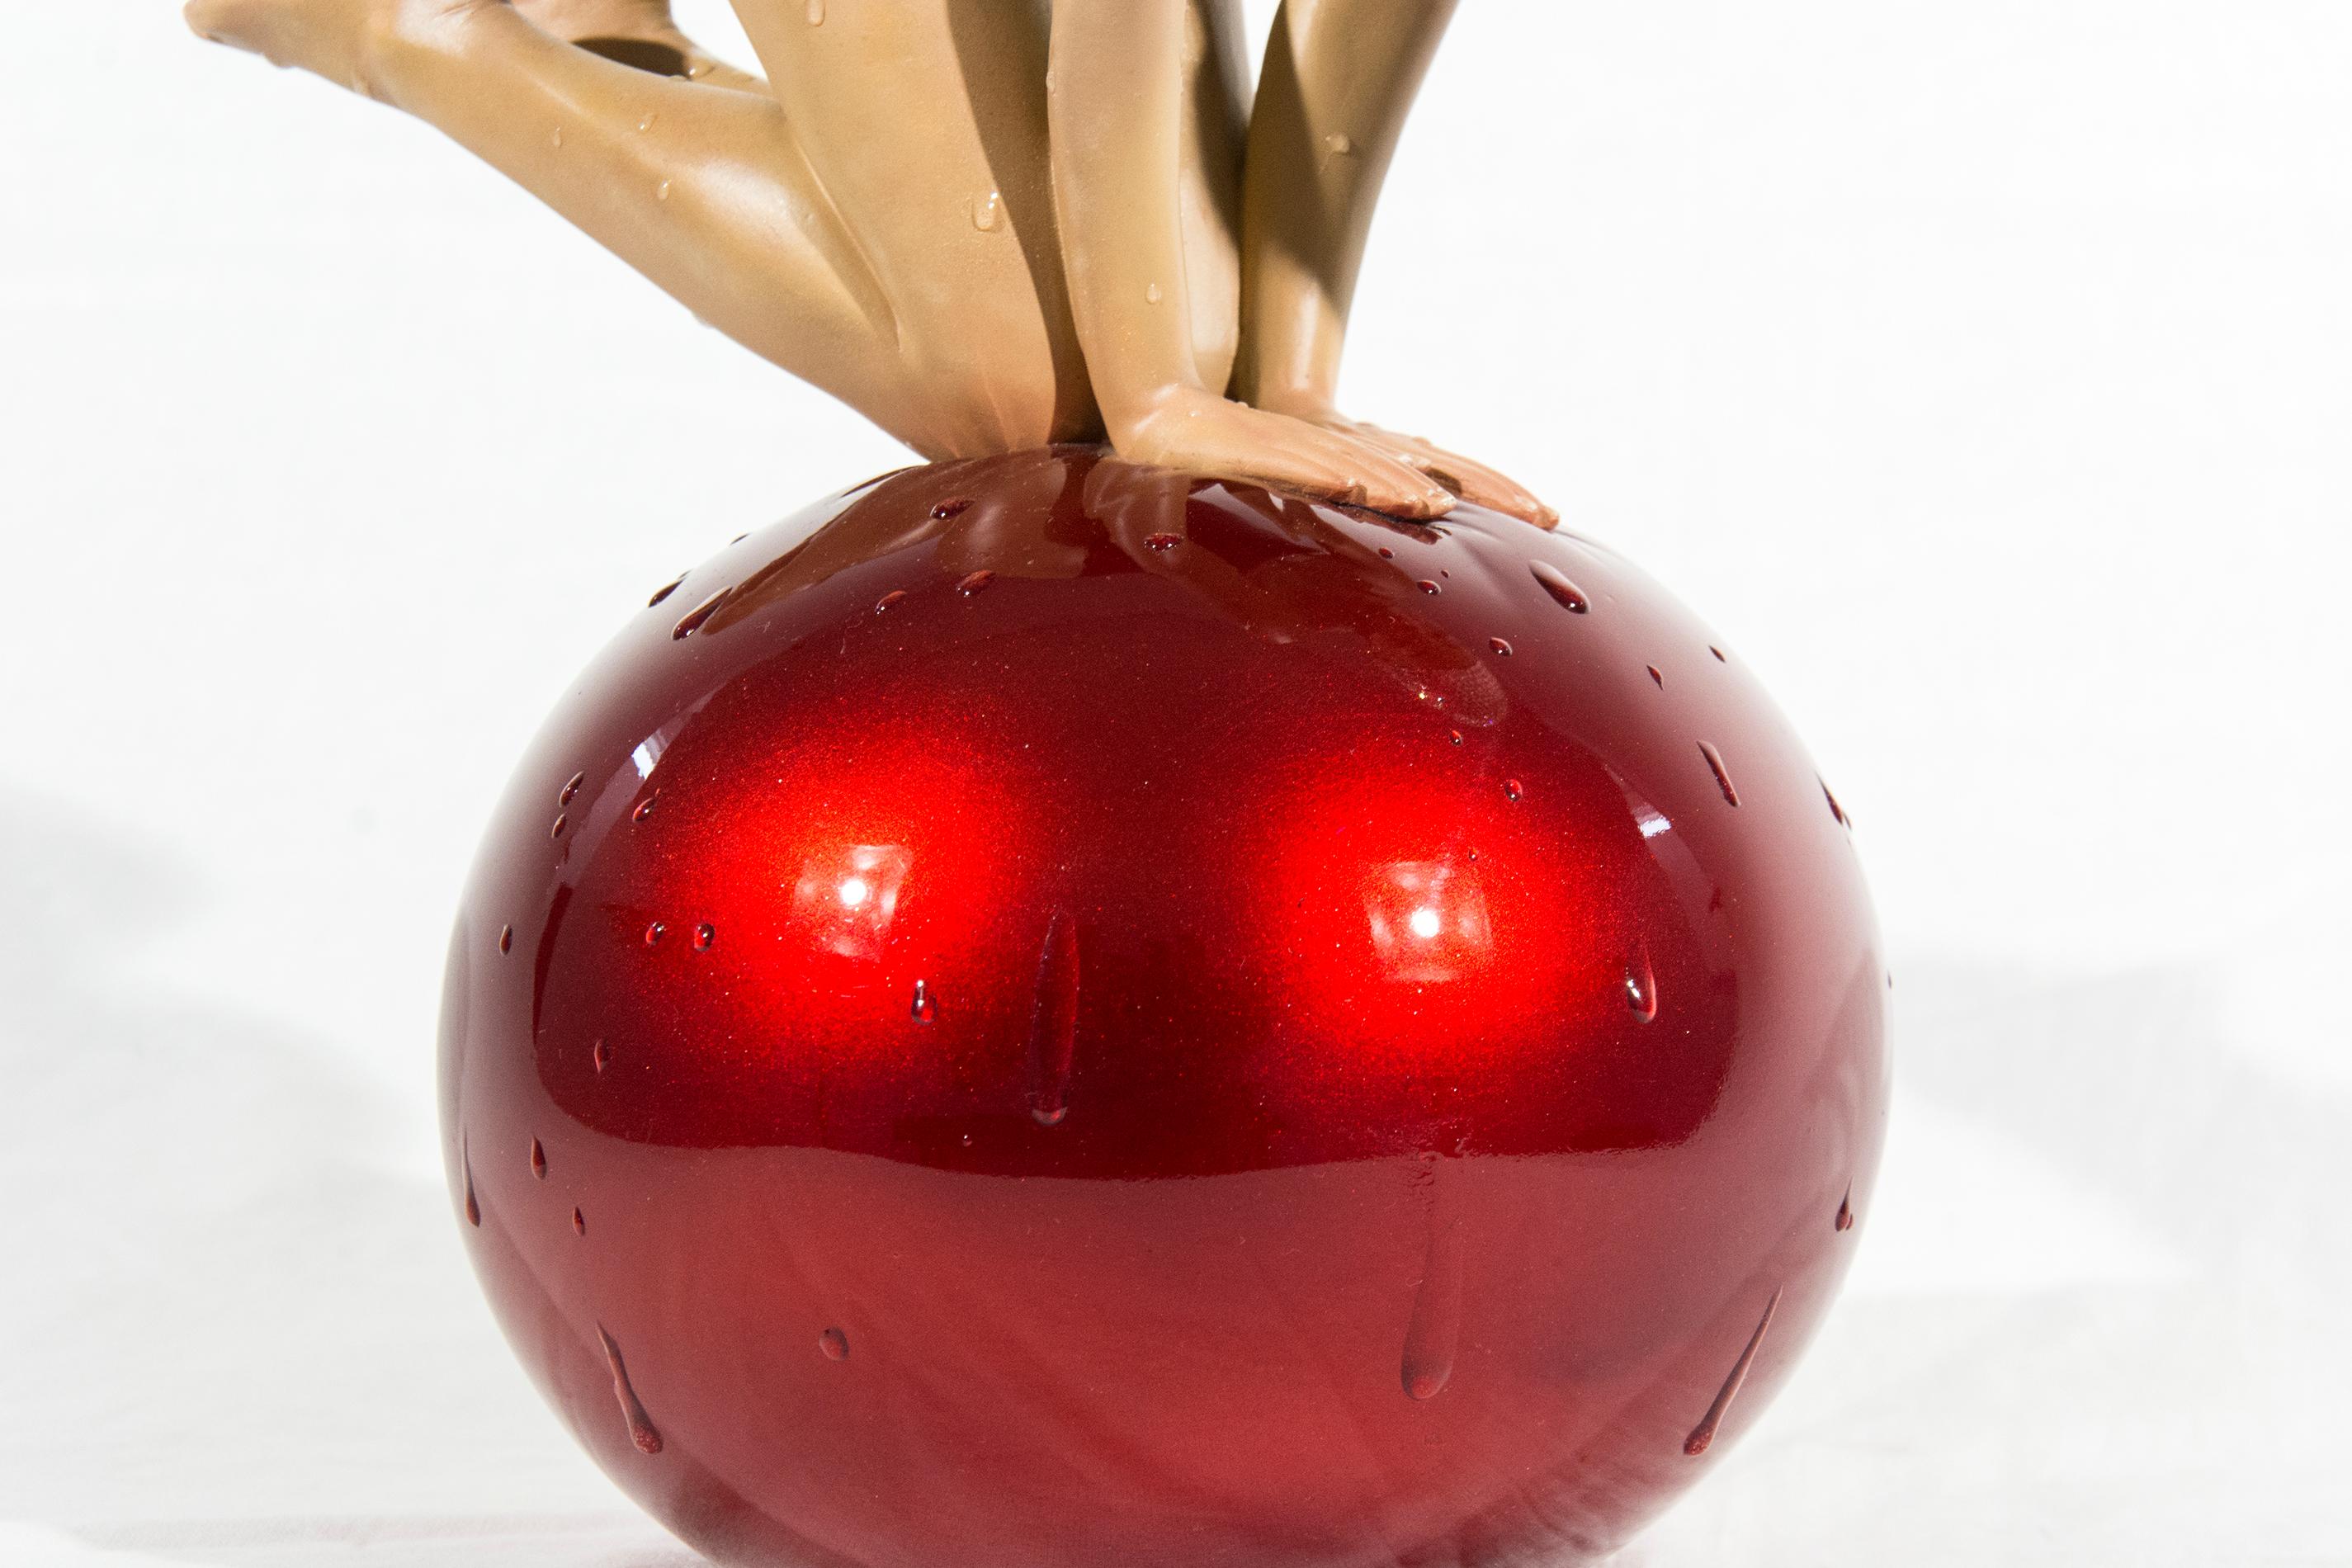 Miniature Quan with Red Ball and Swarovski Crystal Cap 16/28 - Realist Sculpture by Carole A. Feuerman